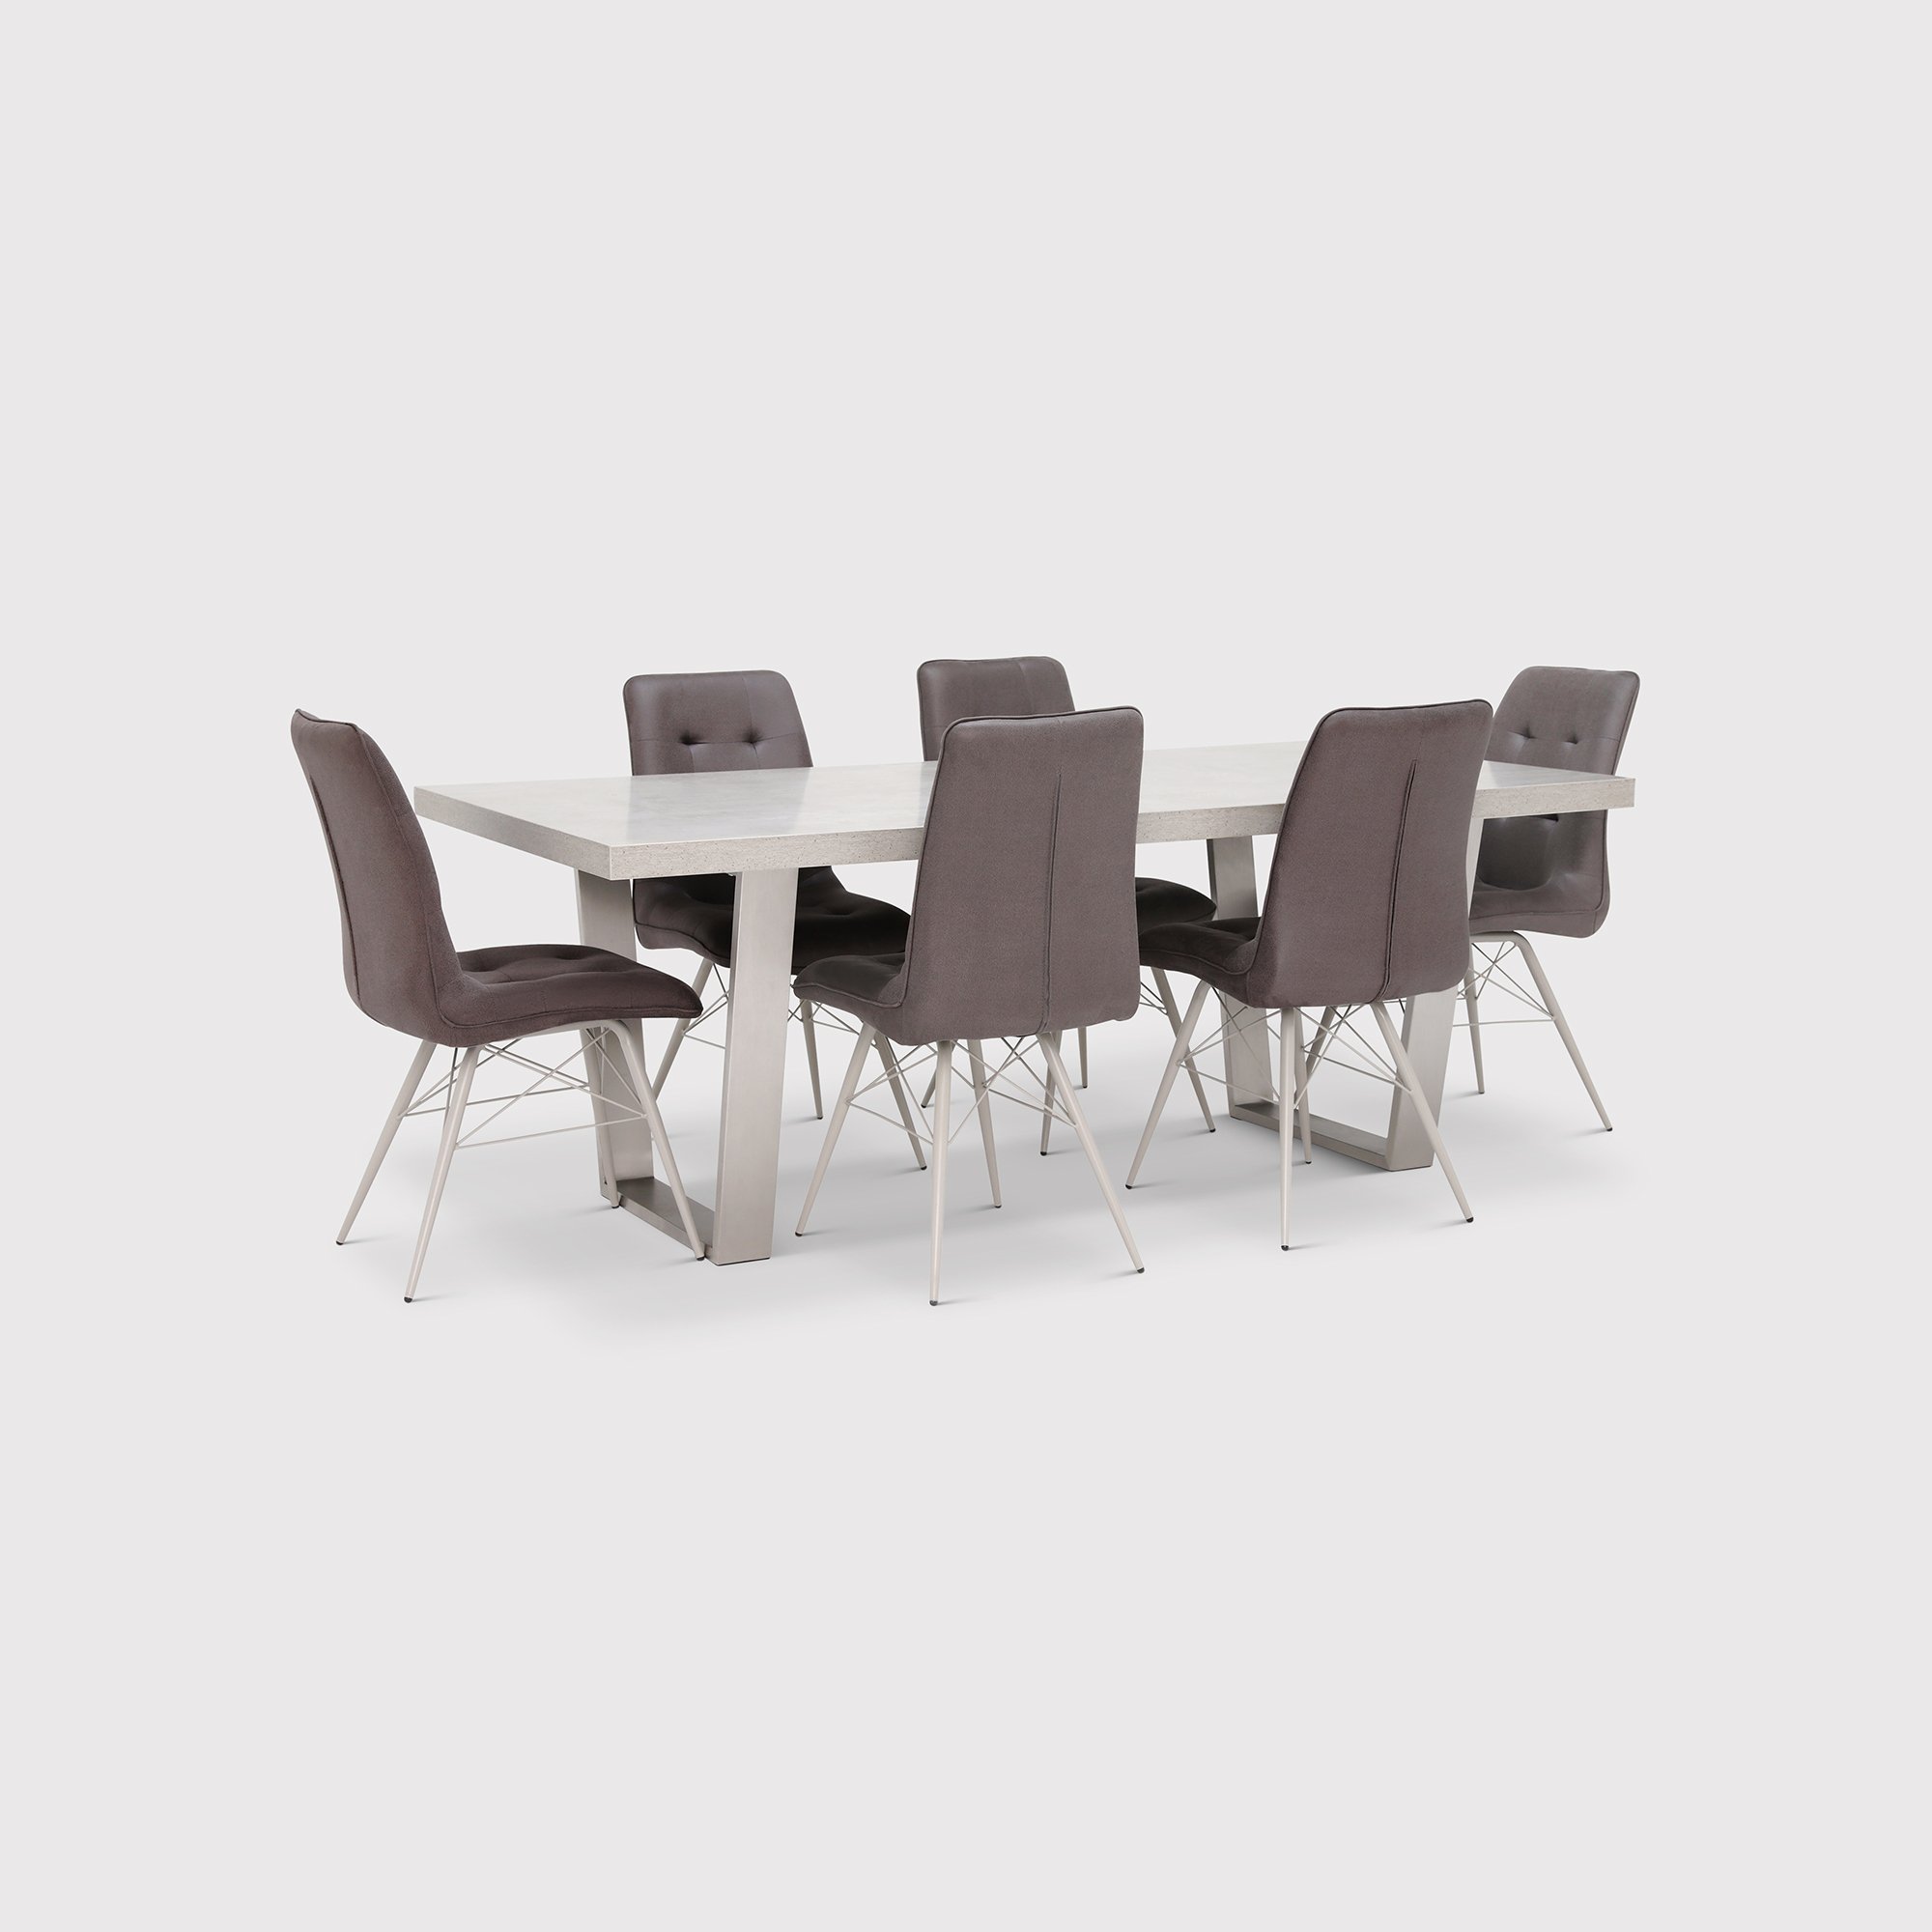 Photo of Halmstad dining table & 6 hix chairs in grey